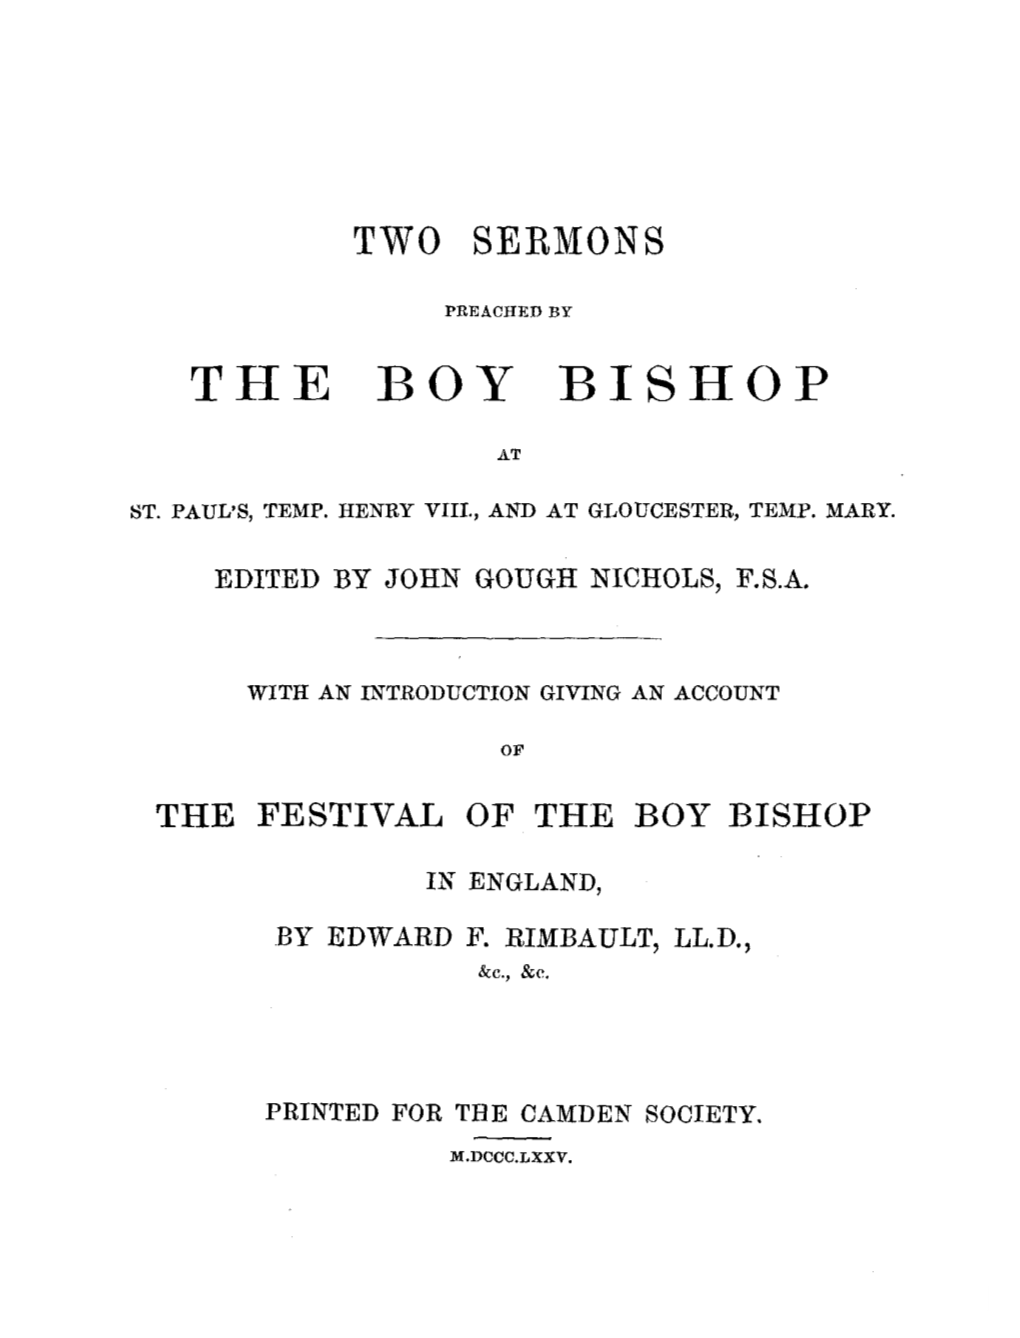 Two Sermons Preached by the Boy Bishop at St. Paul's, Temp. Henry